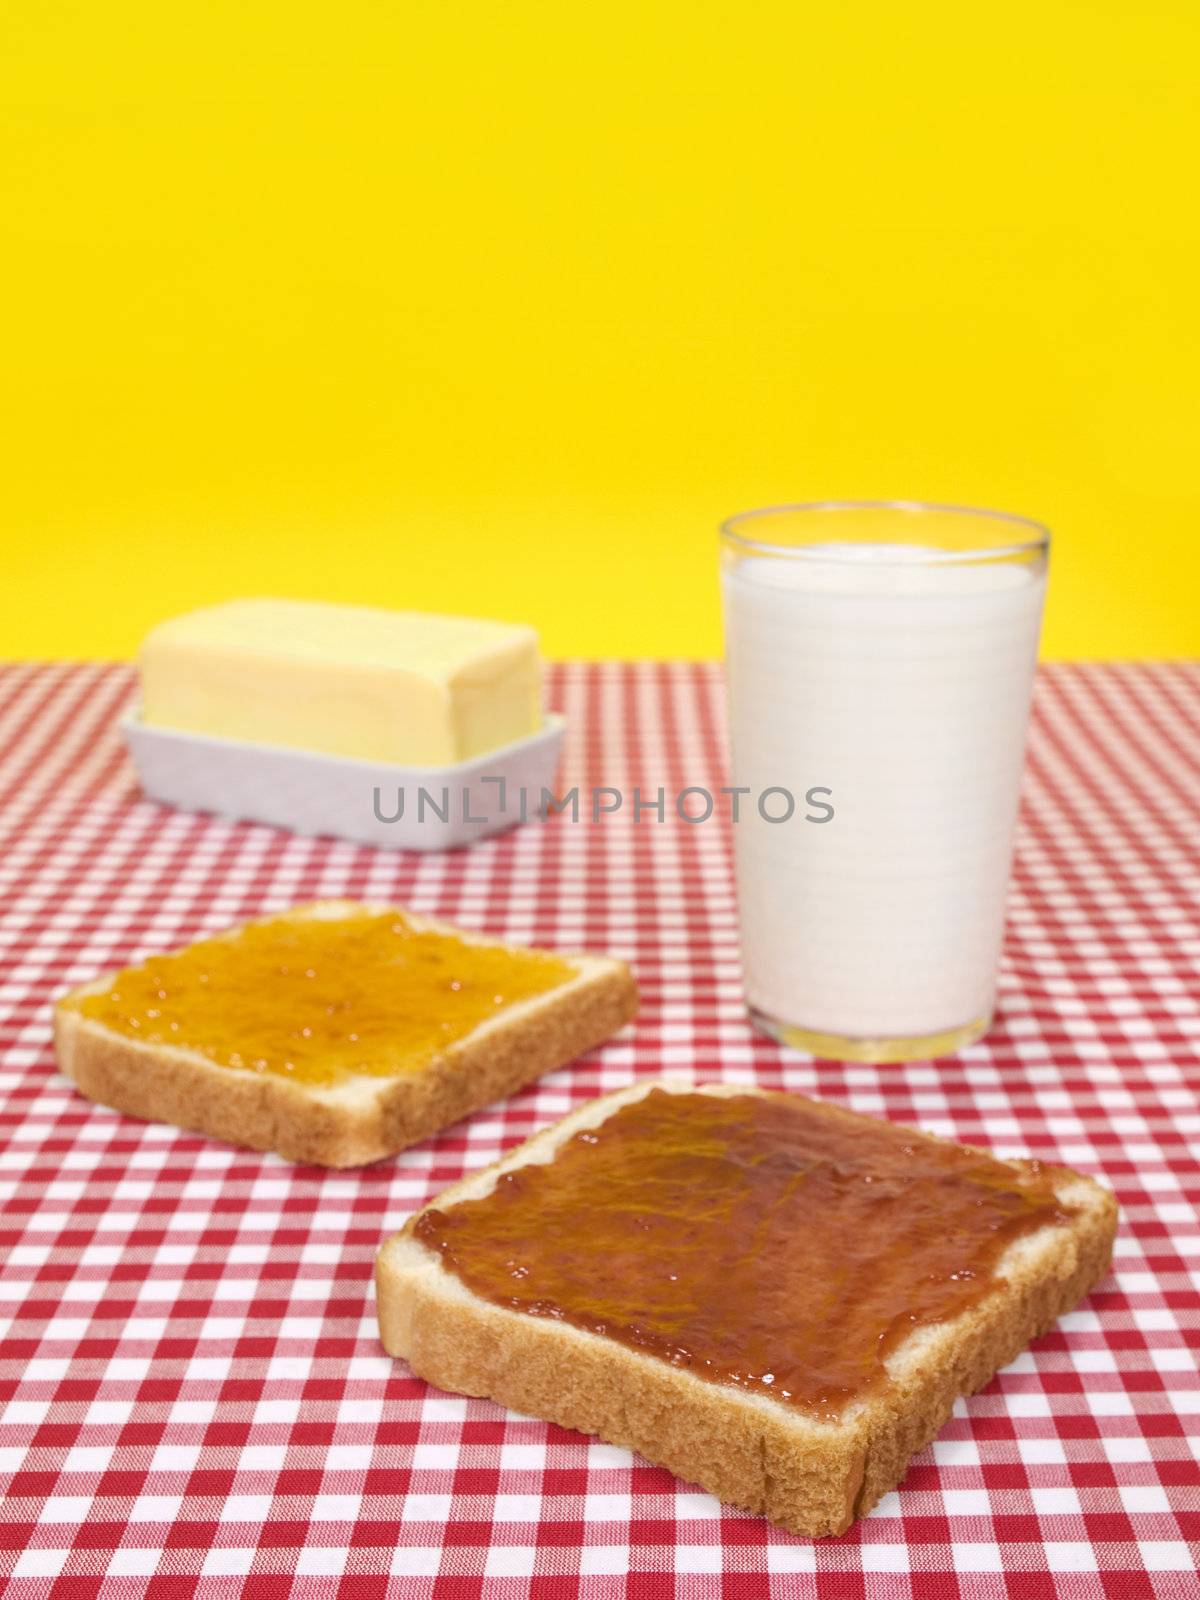 Two slices of bread spread with jam, a glass of milk and a butter stick.